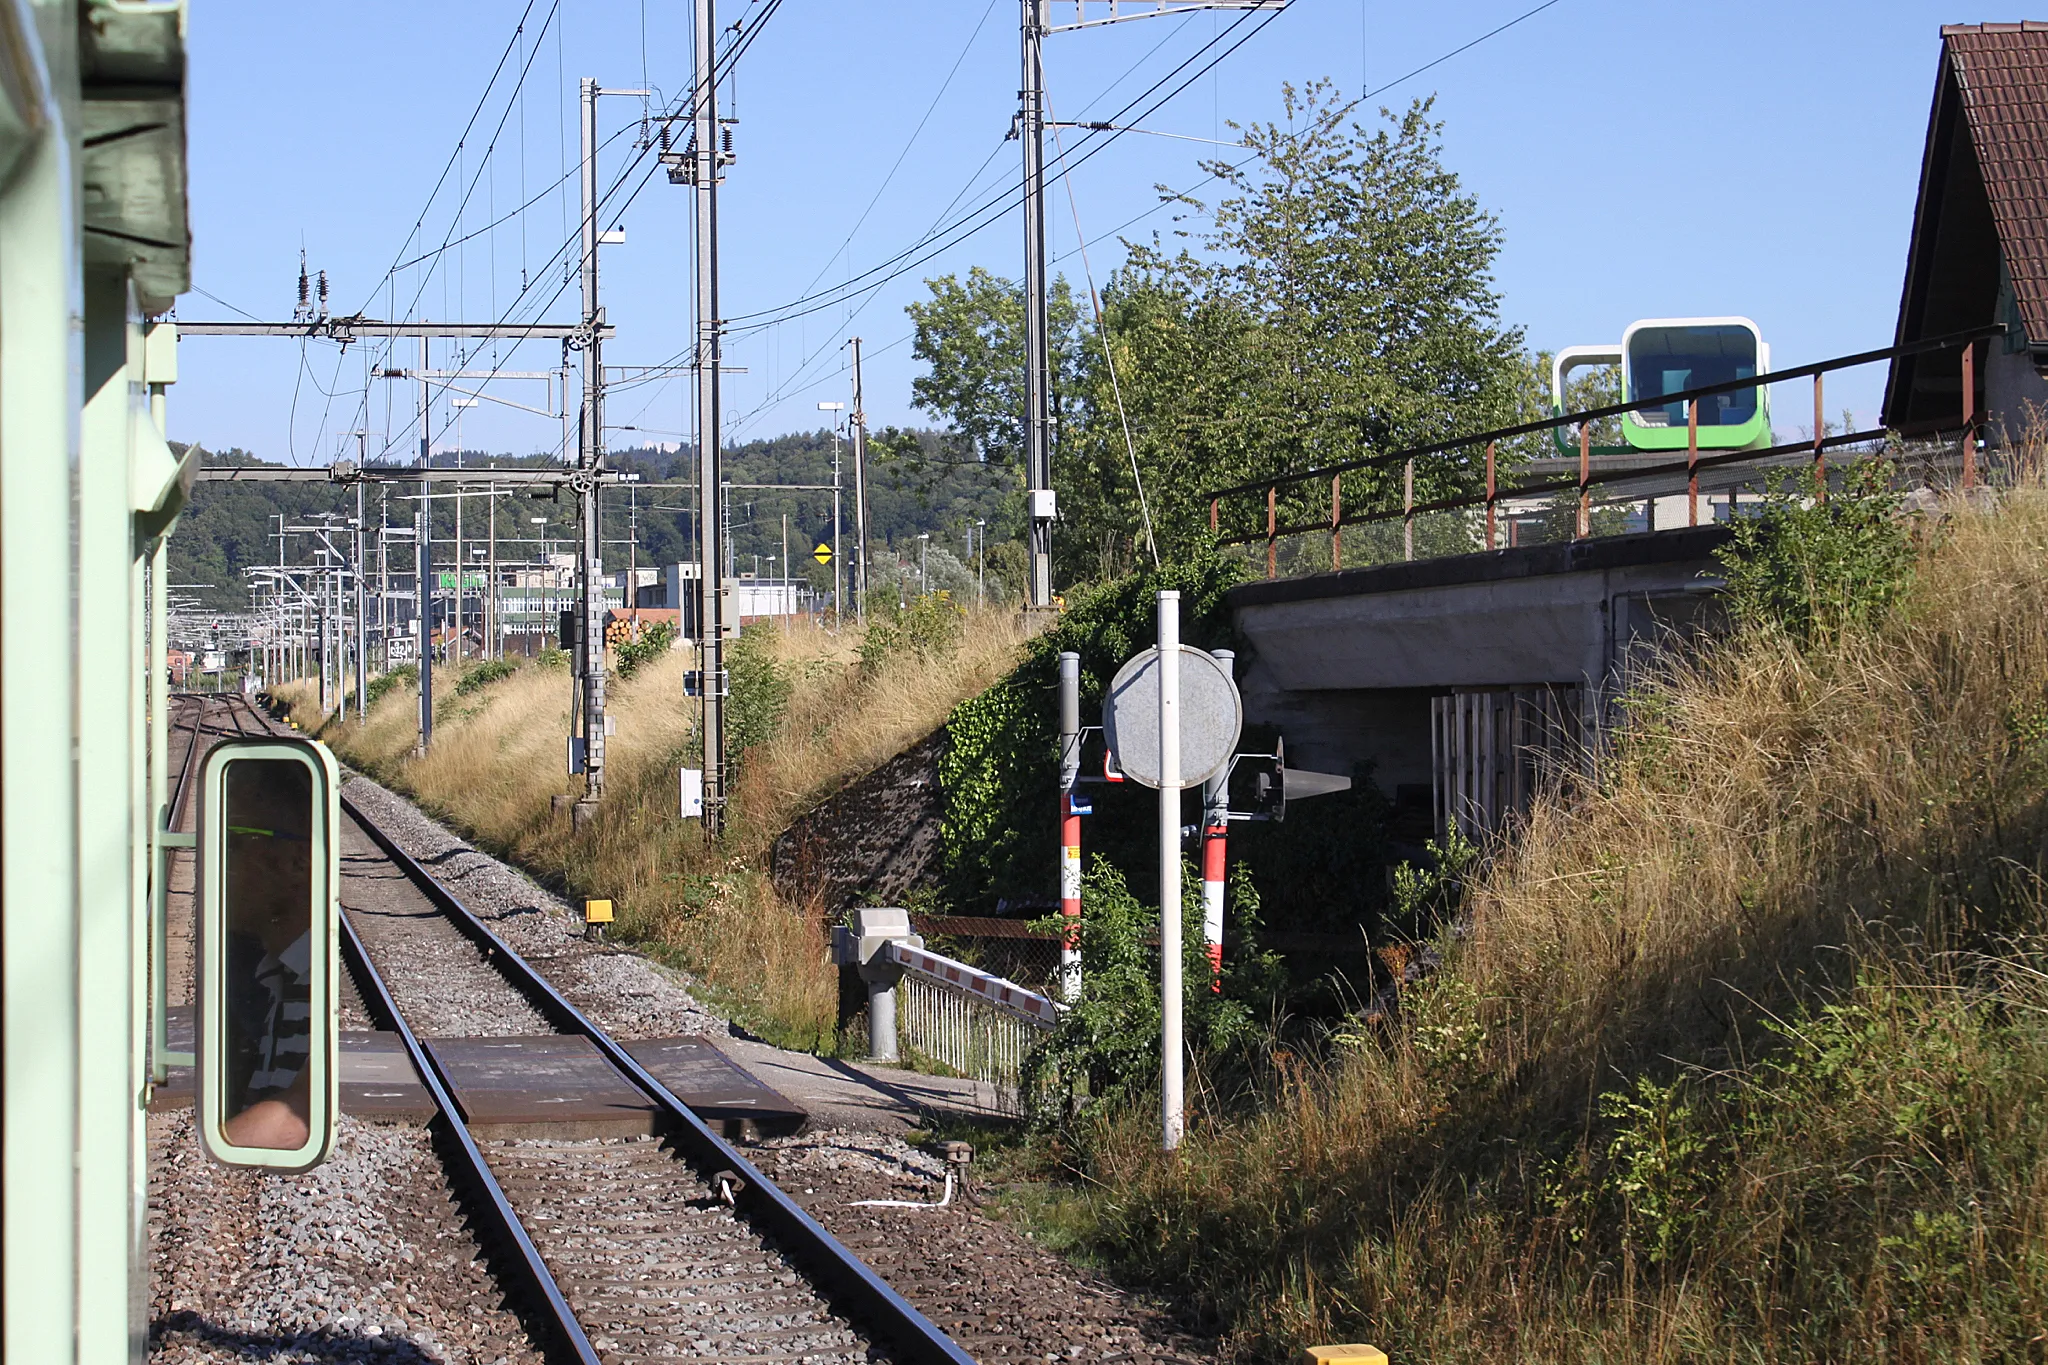 Photo showing: EXT 31161 from Brig to Burgdorf arriving at Burgdorf railway station.